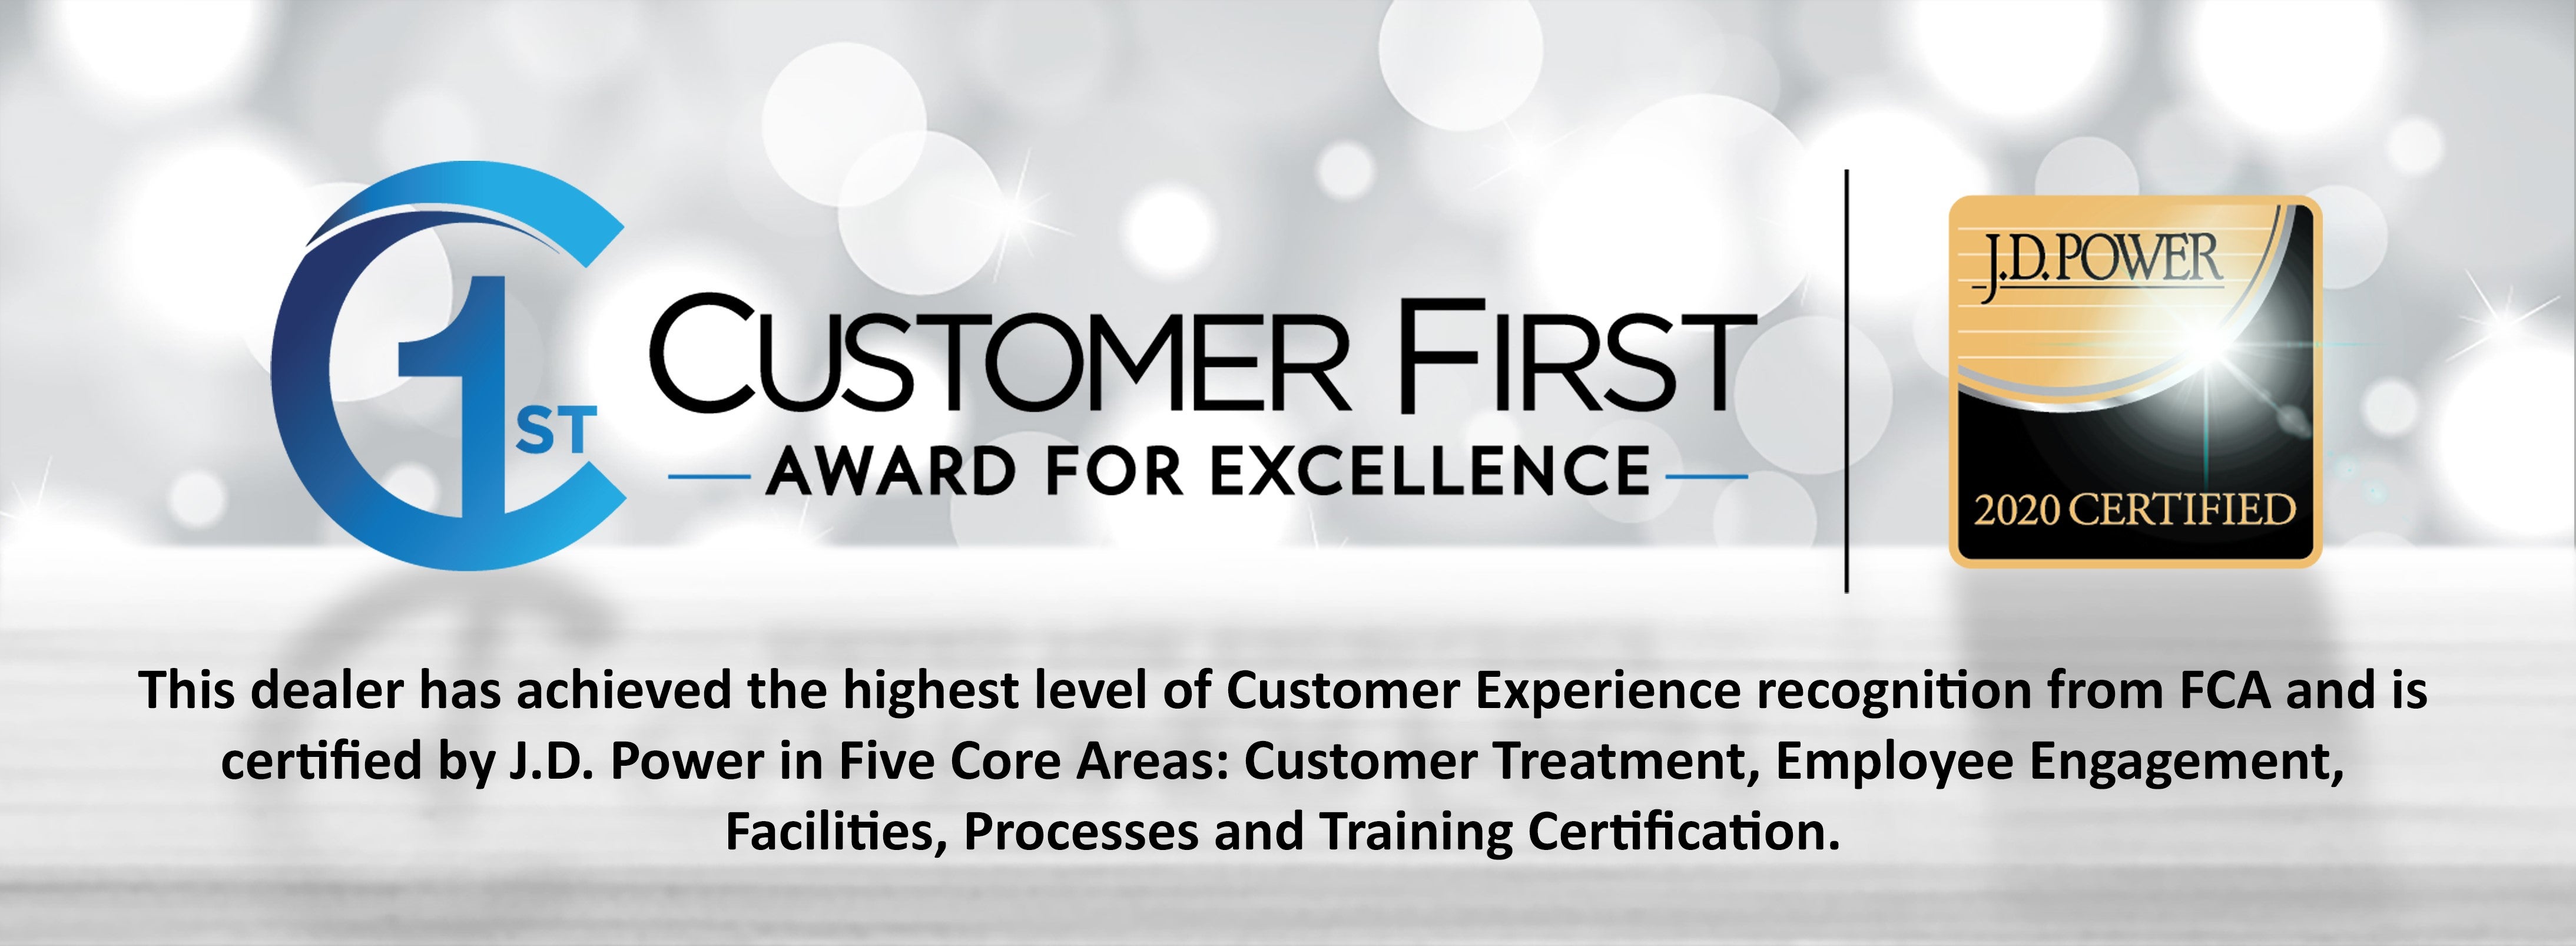 Customer First Award for Excellence for 2019 at Dale Howard Auto Center of Waverly in Waverly, IA